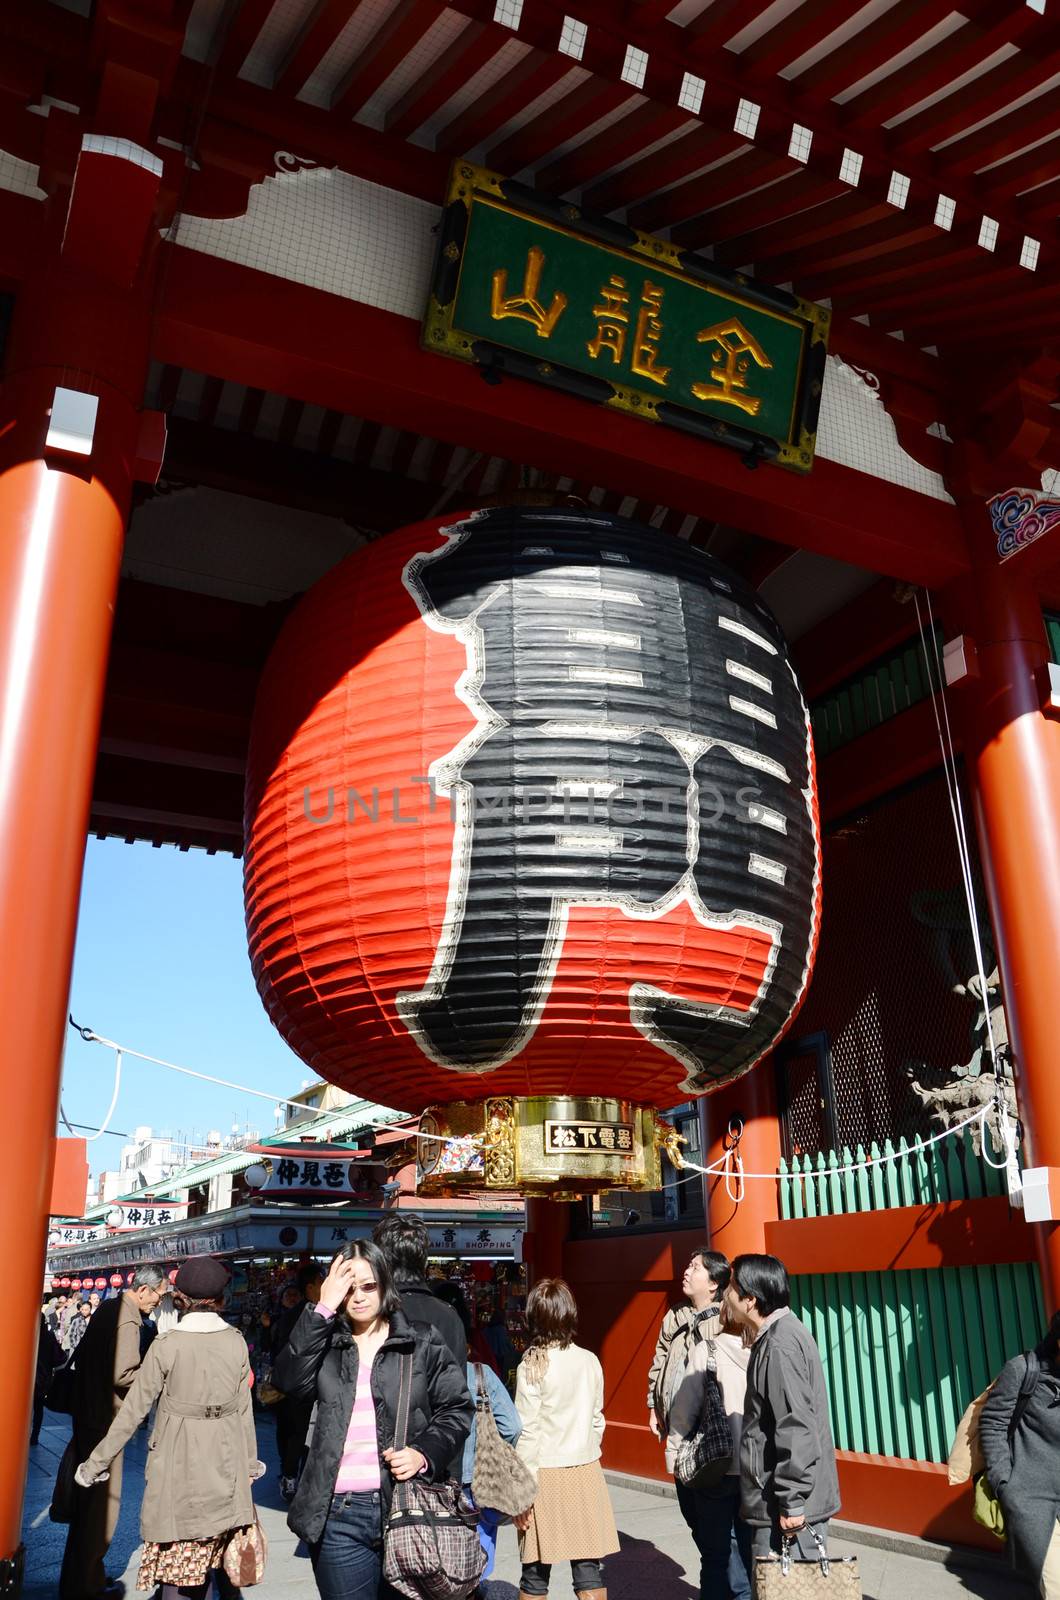 TOKYO, JAPAN - NOV 21: Imposing Buddhist structure features a massive paper lantern painted in vivid red-and-black tones to suggest thunder clouds and lightning at sensoji temple on November 21, 2013 in Tokyo, Japan.